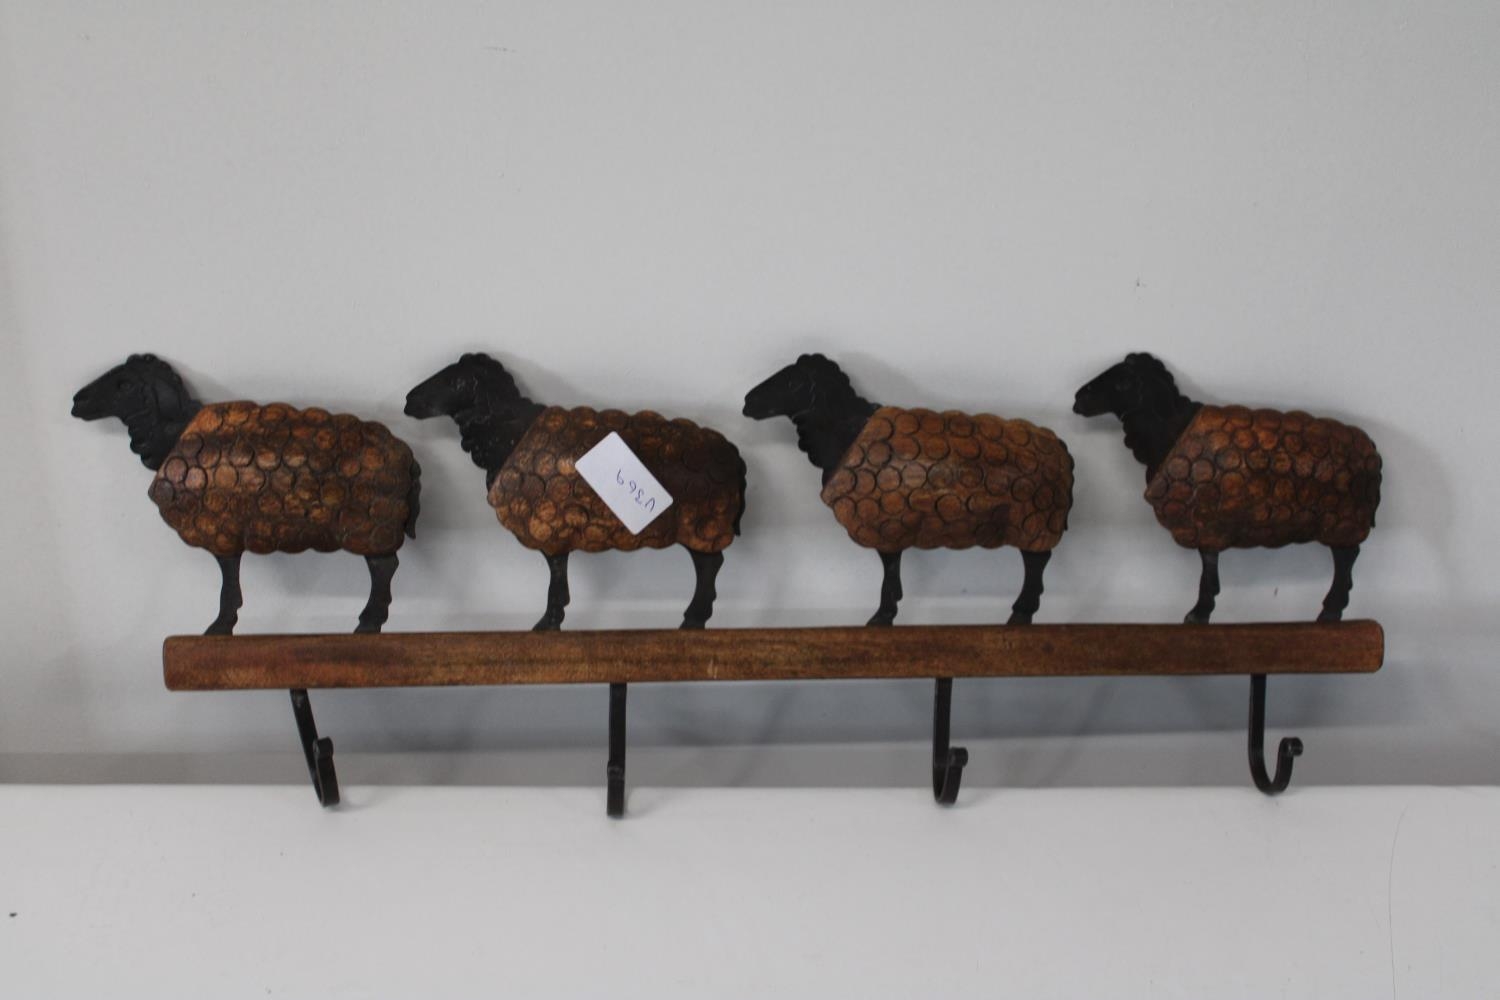 A metal a wooden coat rack in the form of sheep